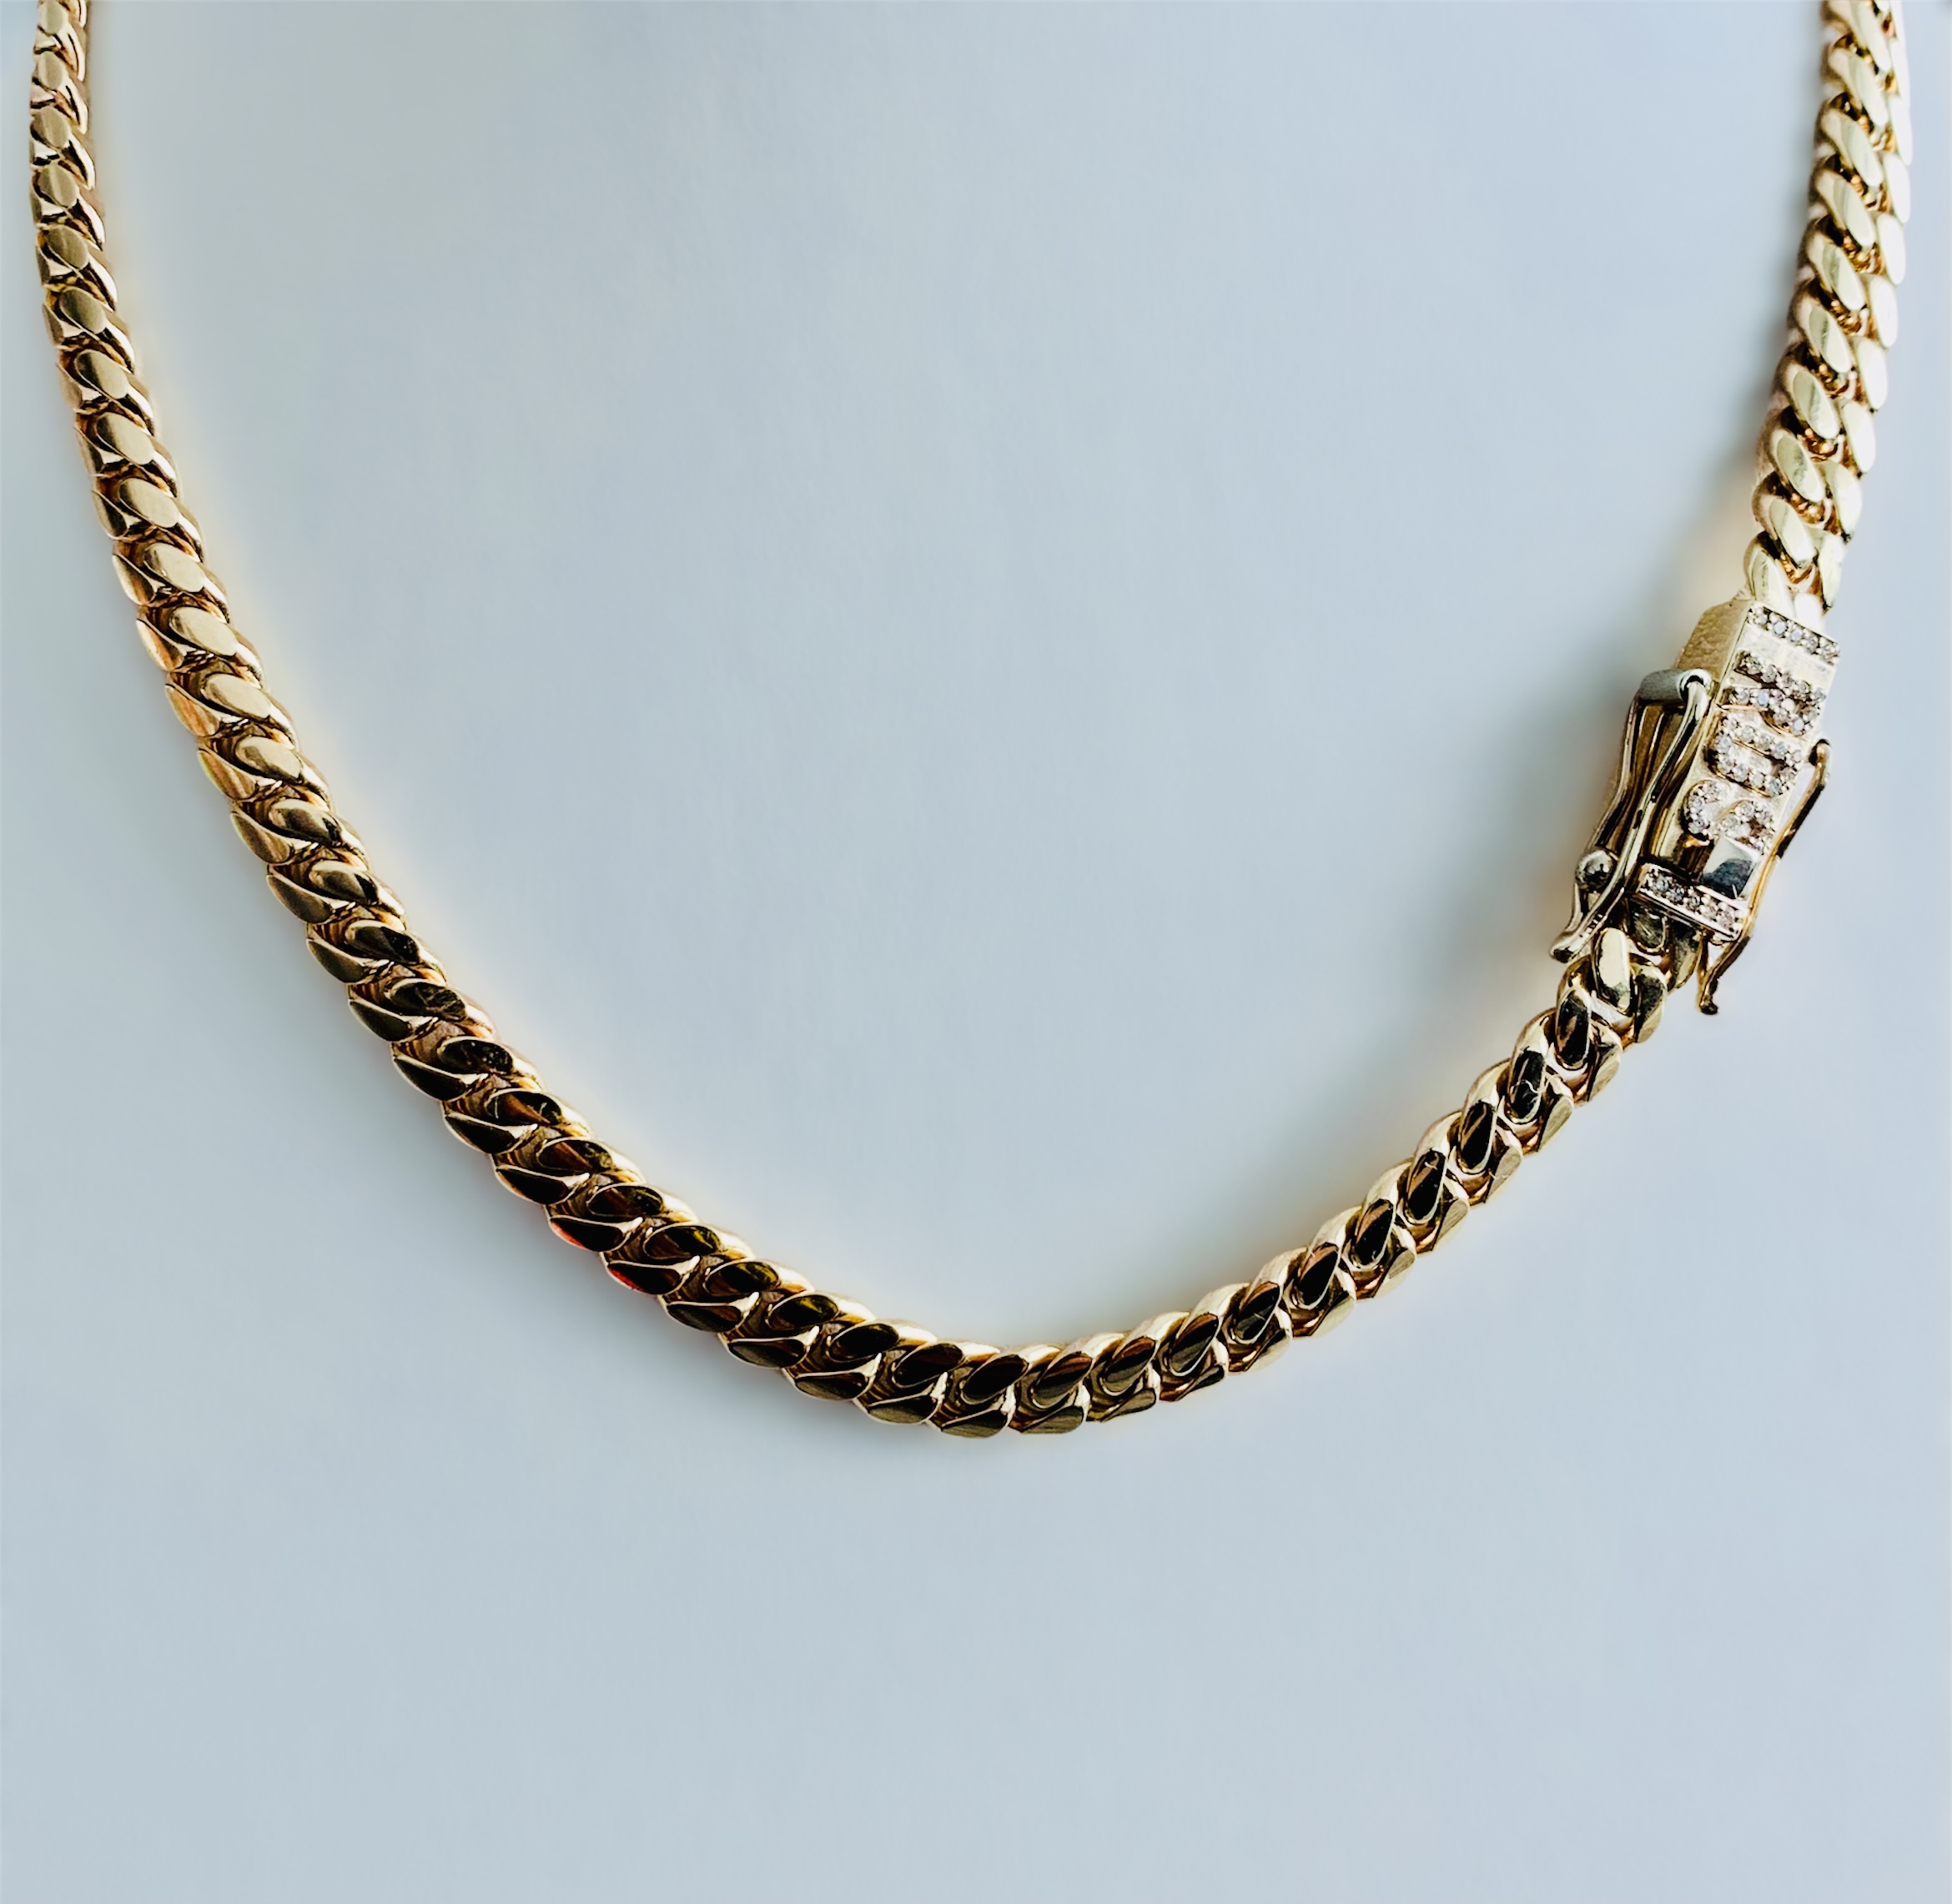 Handmade Miami Cuban Chains | Gold Hip Hop Chains, Links, Necklace